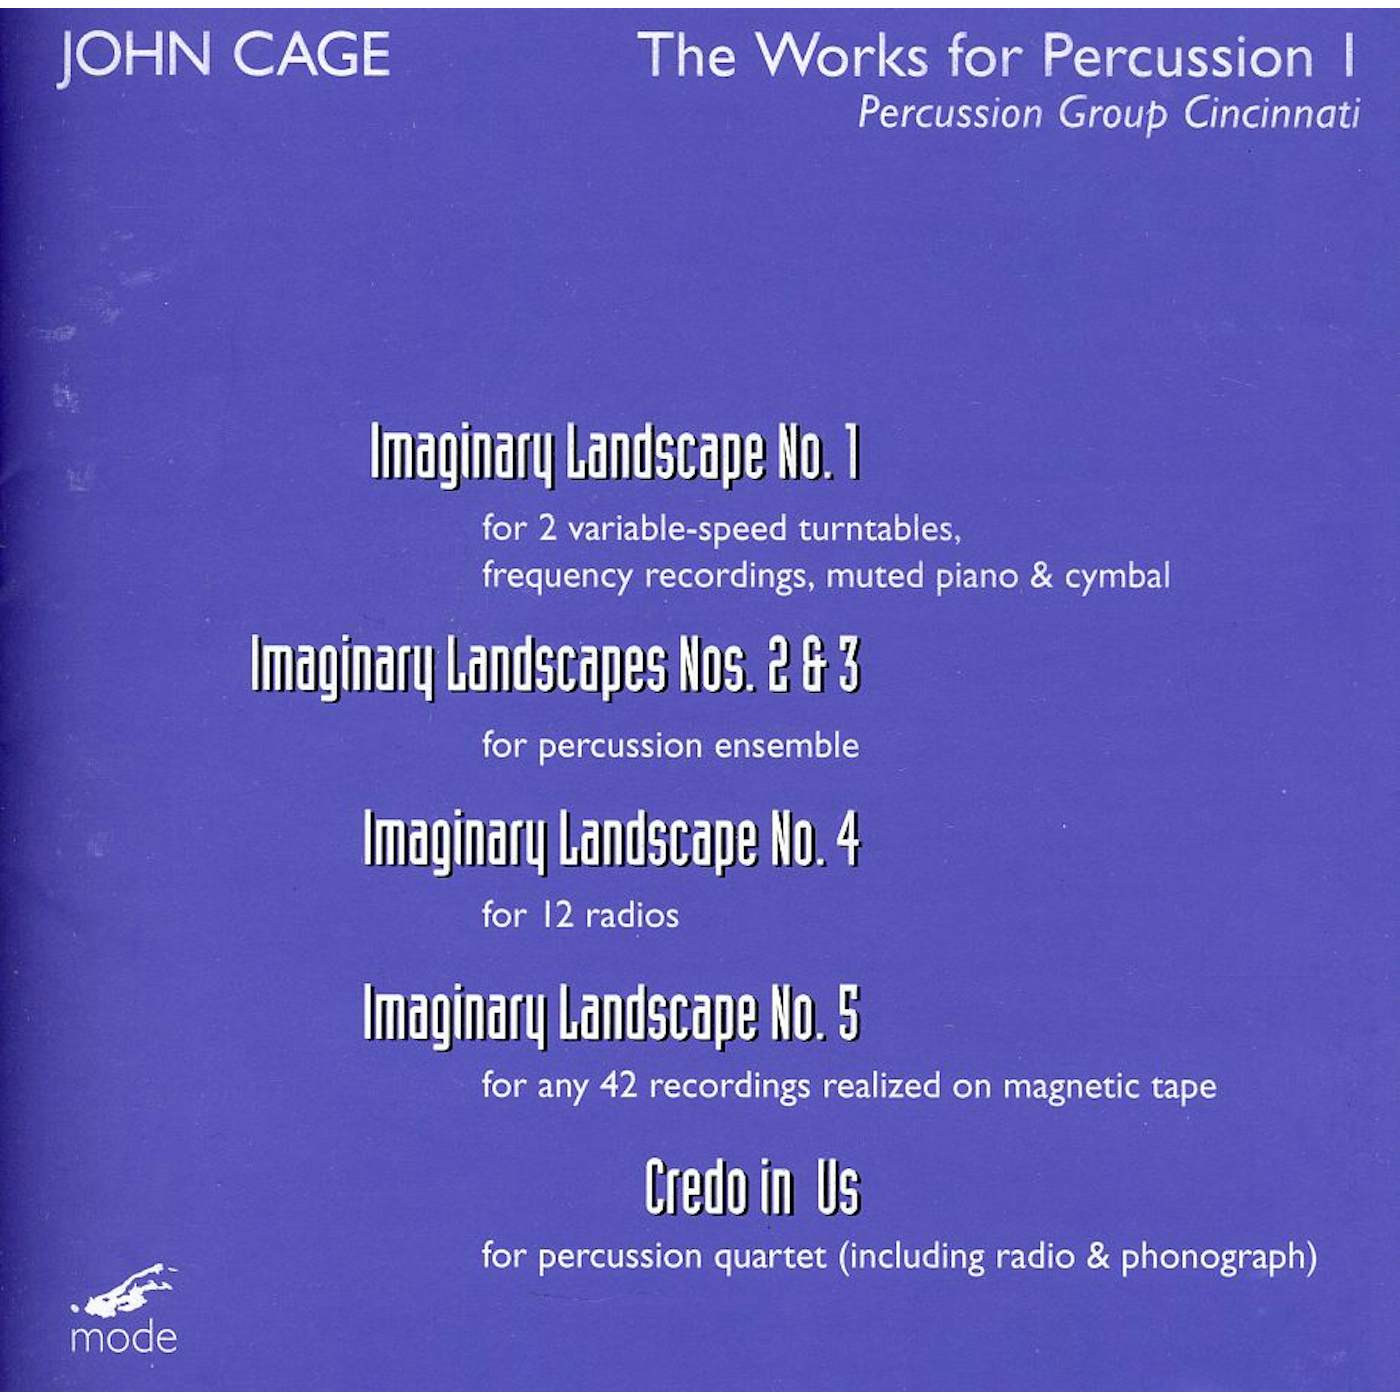 John Cage WORKS FOR PERCUSSION 1 DVD